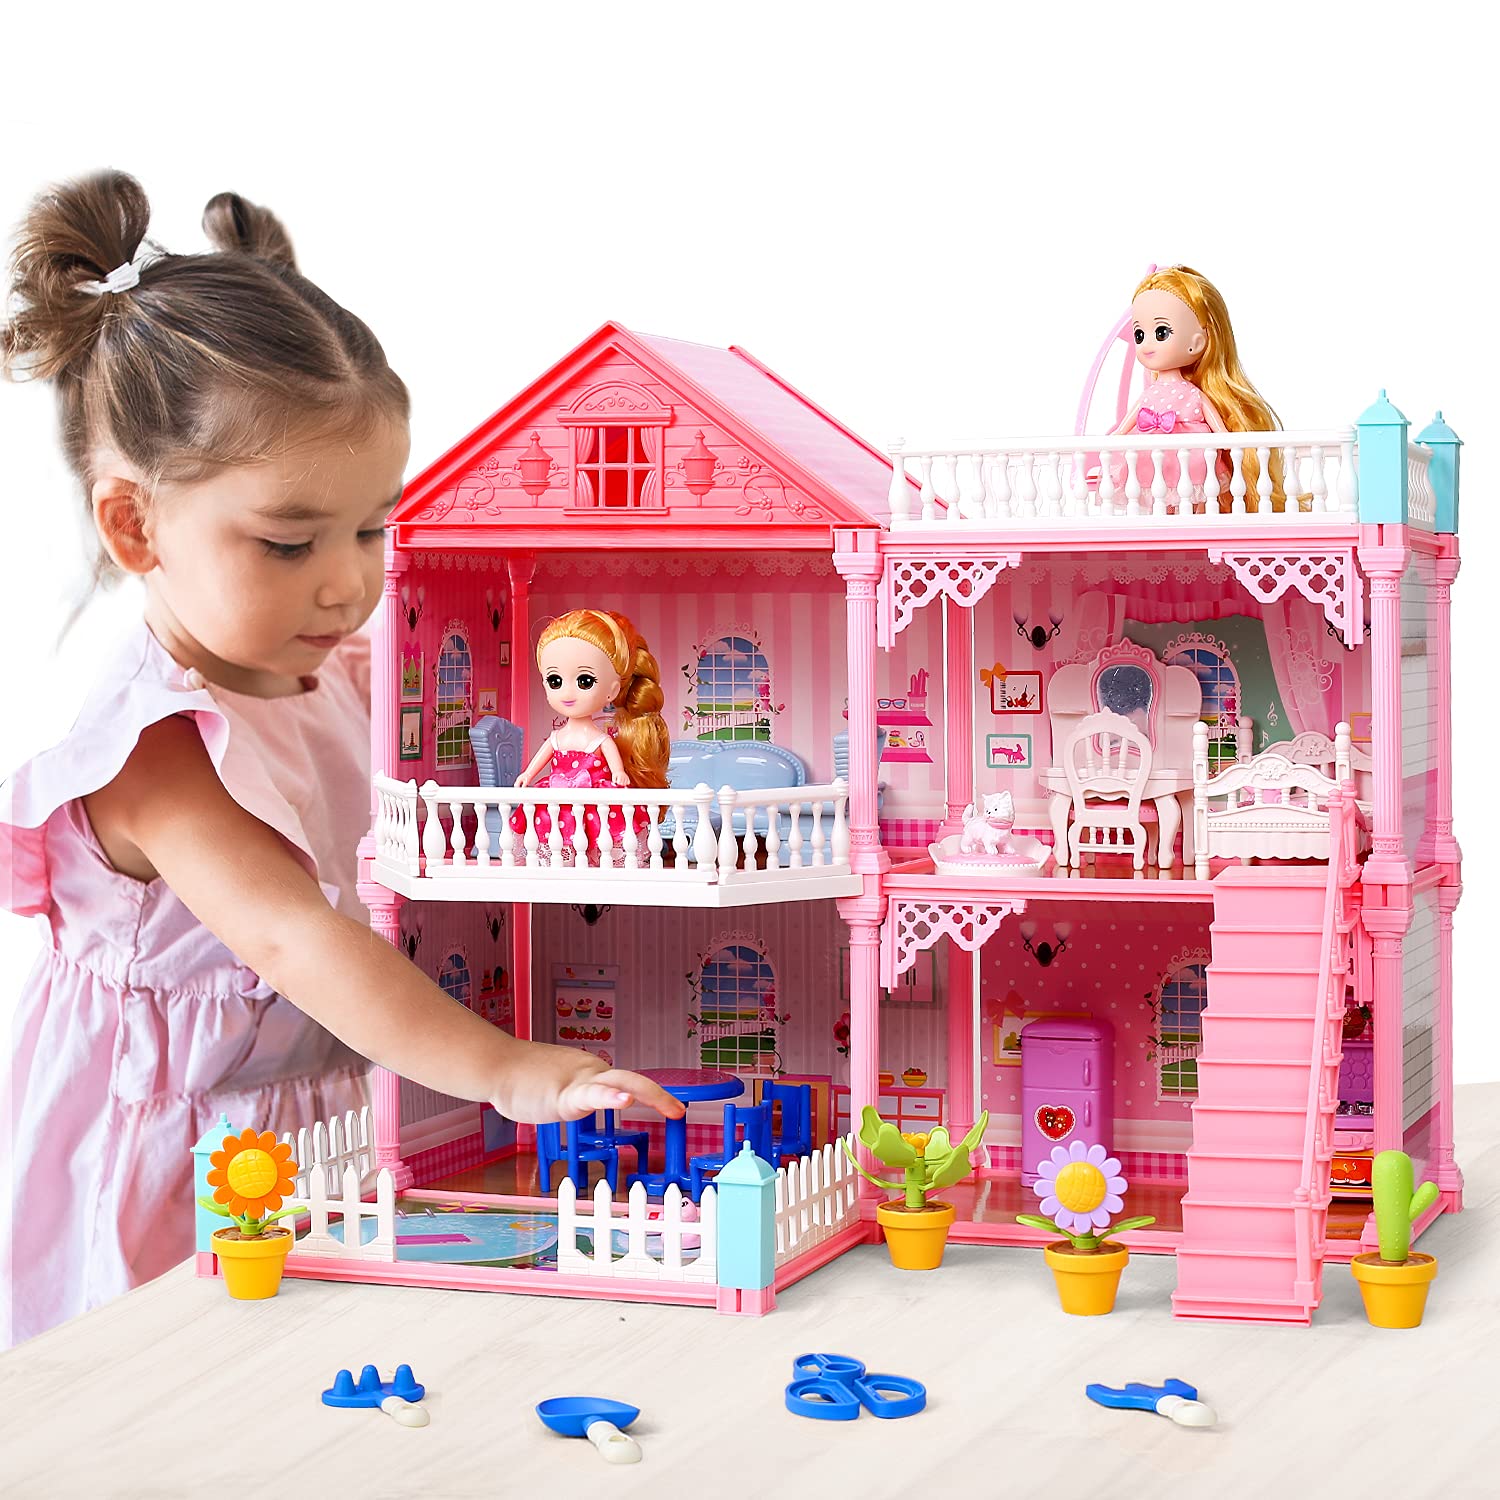 JoyStone 11 Rooms Huge Dollhouse with Play Mat, 2 Dolls and Colorful Light,  31 x 28 x 27 Dreamhouse w/Furniture Doll House Gift for Girls 